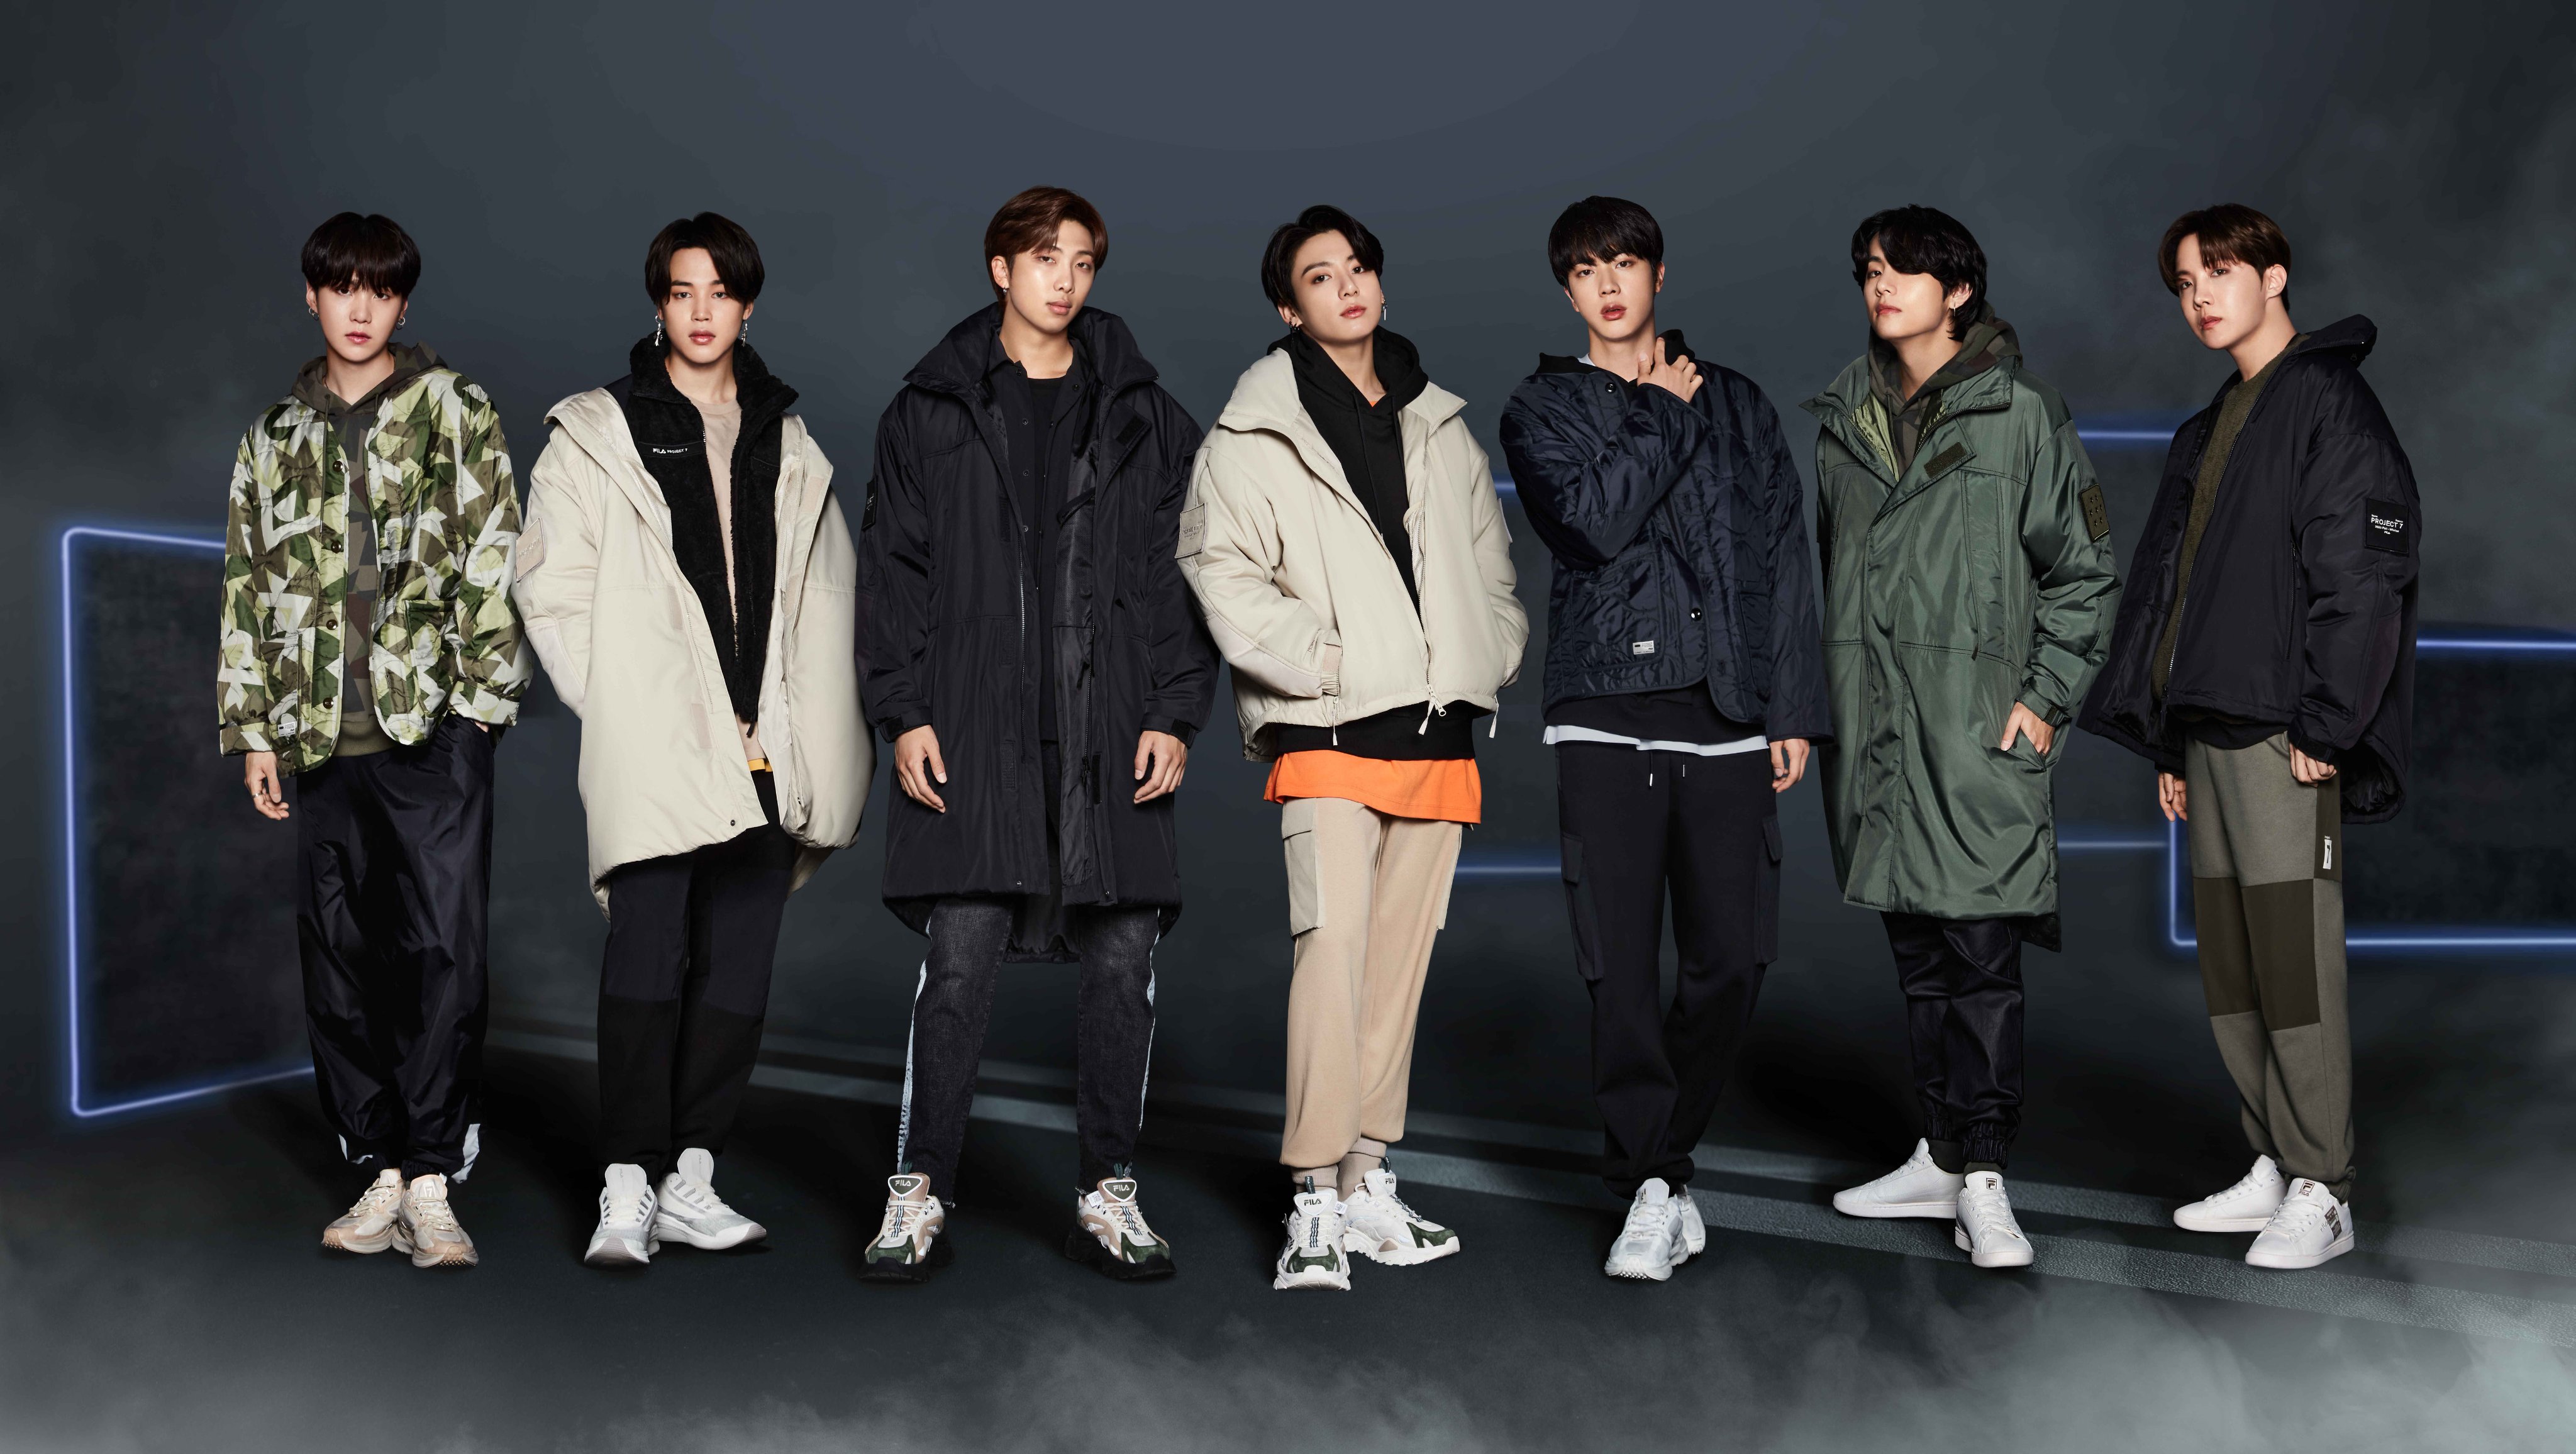 FILA on Twitter: "It's here: Project 7 is available now https://t.co/rnVVaBgbEJ. #BTS #RM #SUGA #jhope #Jimin #V #JungKook https://t.co/z53ztmTZ9Z"